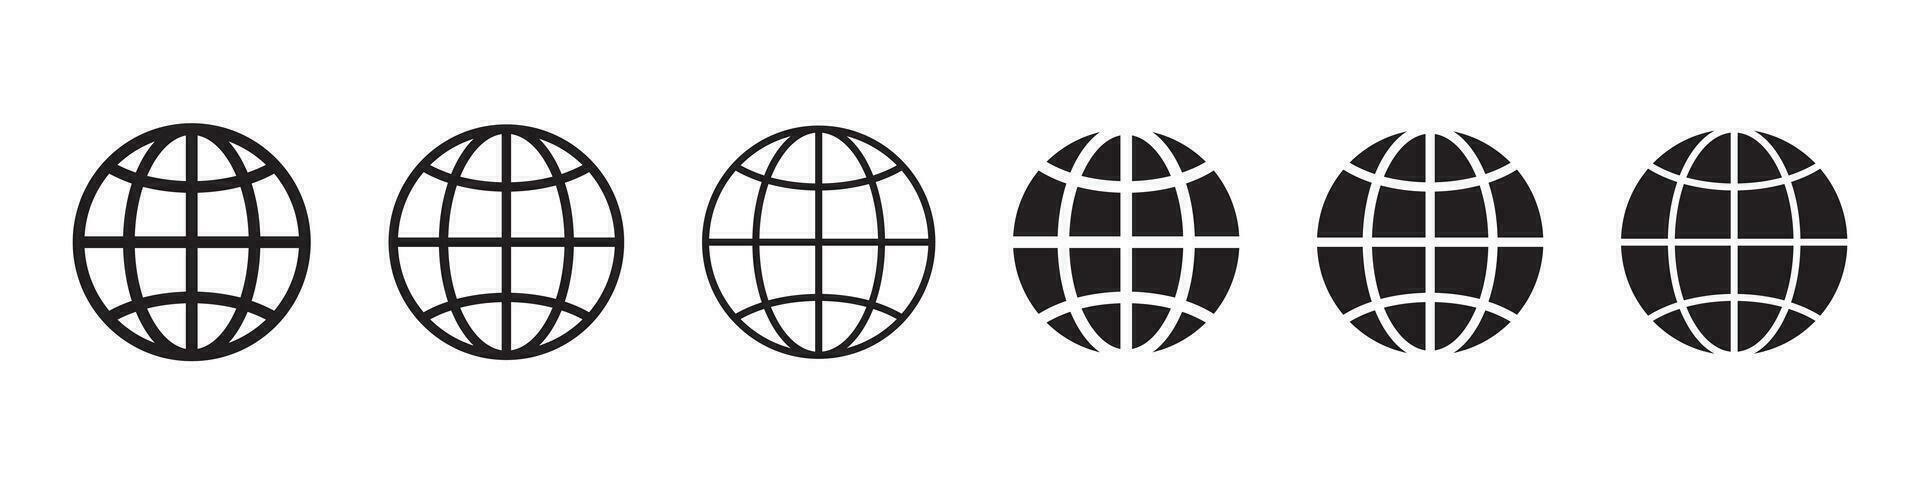 Globe icon, WWW world wide web set site symbol, Internet collection icon, website address globe, flat and outline signs. vector